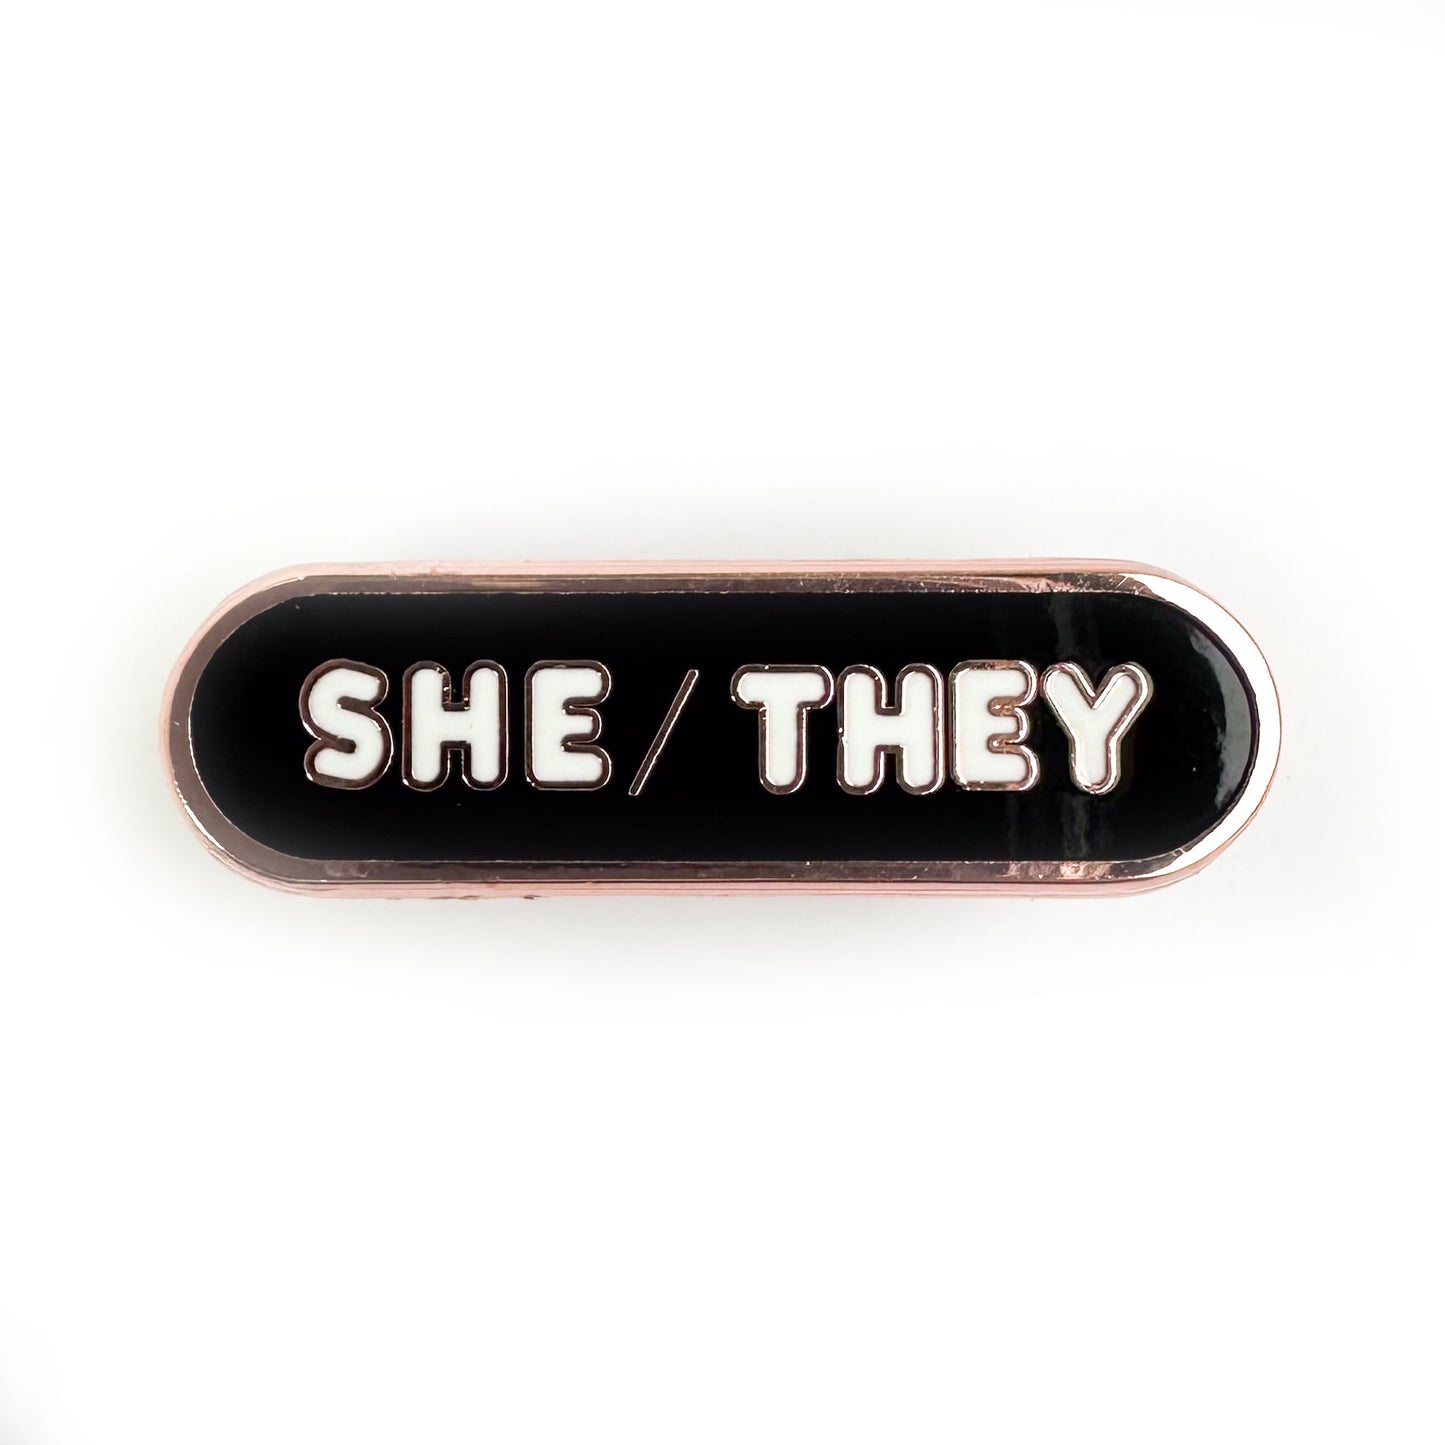 A pin shaped like a bandaid with white letters that read "She/They" on a black background. 